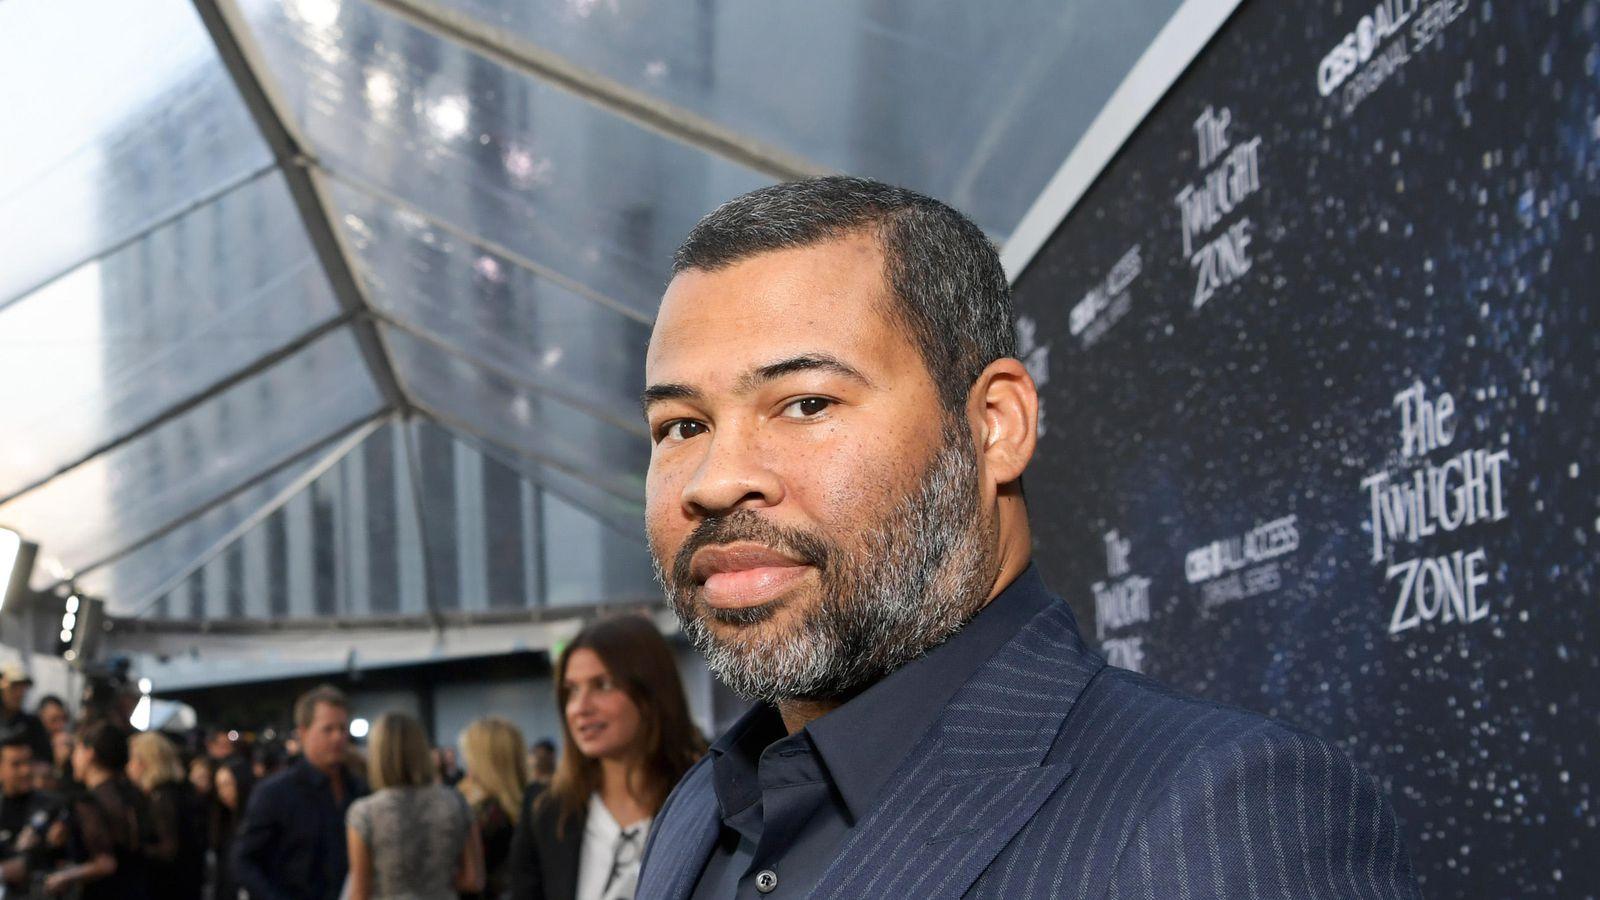 Jordan Peele isn't stopping after Twilight Zone and Us